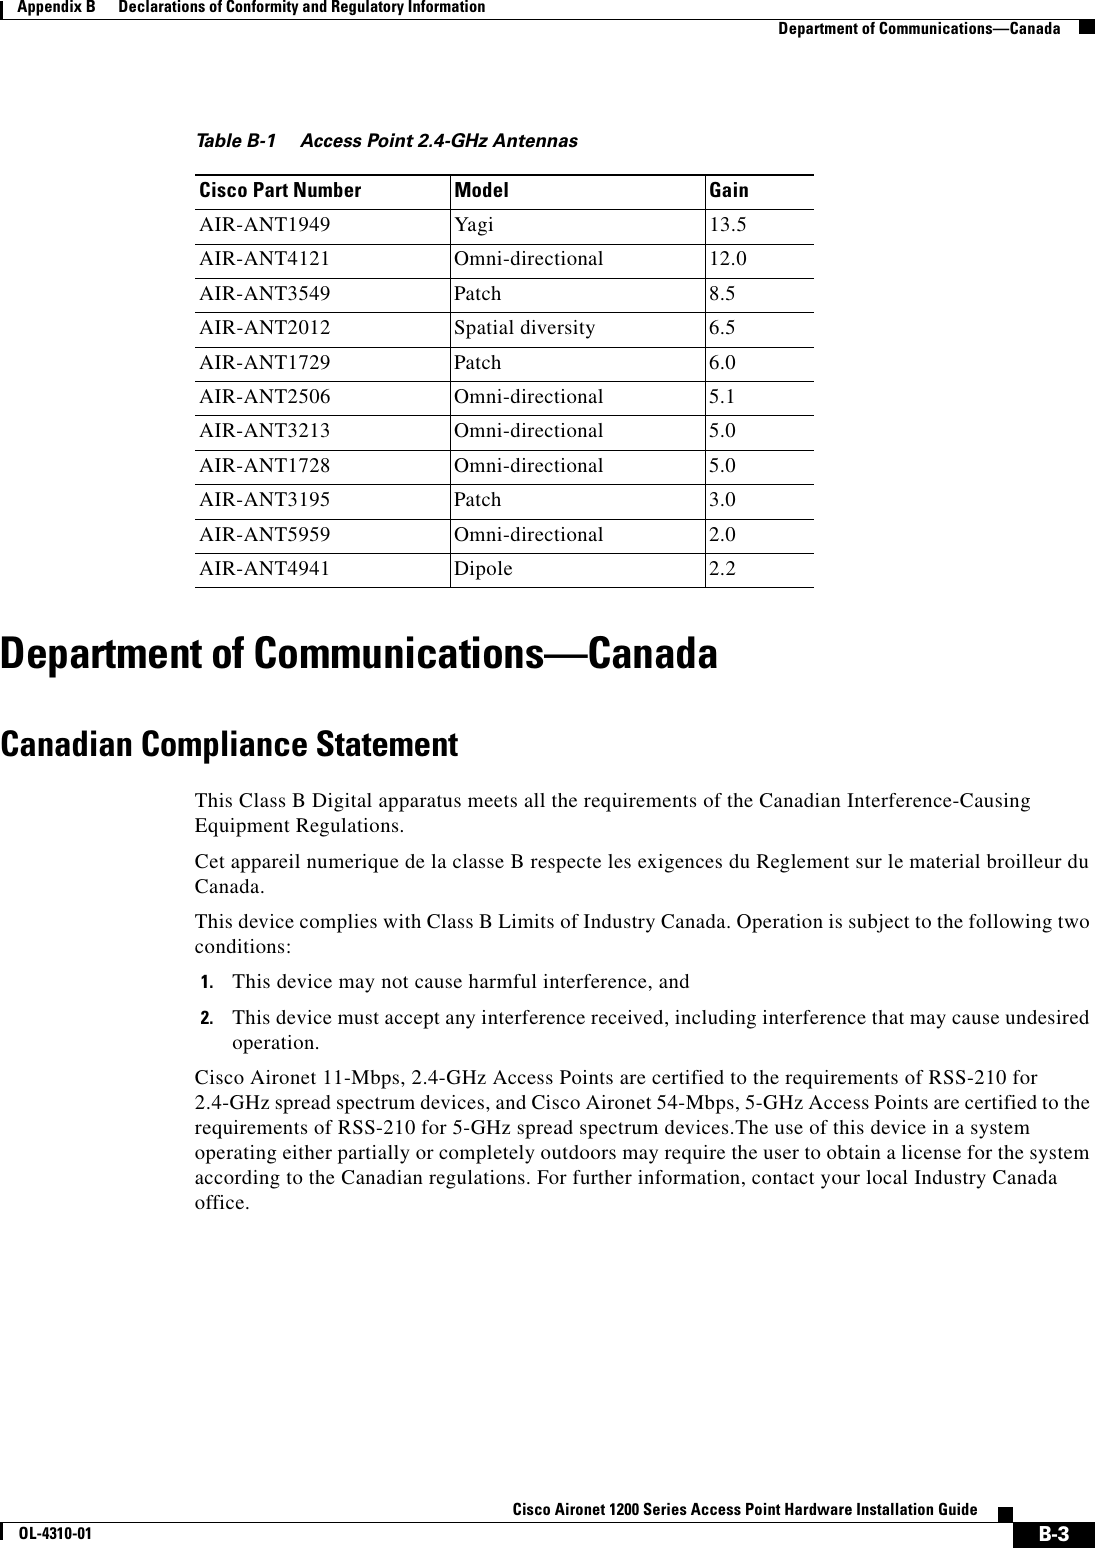  B-3Cisco Aironet 1200 Series Access Point Hardware Installation GuideOL-4310-01Appendix B      Declarations of Conformity and Regulatory InformationDepartment of Communications—CanadaDepartment of Communications—CanadaCanadian Compliance StatementThis Class B Digital apparatus meets all the requirements of the Canadian Interference-Causing Equipment Regulations.Cet appareil numerique de la classe B respecte les exigences du Reglement sur le material broilleur du Canada.This device complies with Class B Limits of Industry Canada. Operation is subject to the following two conditions:1. This device may not cause harmful interference, and2. This device must accept any interference received, including interference that may cause undesired operation.Cisco Aironet 11-Mbps, 2.4-GHz Access Points are certified to the requirements of RSS-210 for 2.4-GHz spread spectrum devices, and Cisco Aironet 54-Mbps, 5-GHz Access Points are certified to the requirements of RSS-210 for 5-GHz spread spectrum devices.The use of this device in a system operating either partially or completely outdoors may require the user to obtain a license for the system according to the Canadian regulations. For further information, contact your local Industry Canada office.Table B-1 Access Point 2.4-GHz AntennasCisco Part Number Model GainAIR-ANT1949 Yagi 13.5AIR-ANT4121 Omni-directional 12.0AIR-ANT3549 Patch 8.5AIR-ANT2012 Spatial diversity 6.5AIR-ANT1729 Patch 6.0AIR-ANT2506 Omni-directional 5.1AIR-ANT3213 Omni-directional 5.0AIR-ANT1728 Omni-directional 5.0AIR-ANT3195 Patch 3.0AIR-ANT5959 Omni-directional 2.0AIR-ANT4941 Dipole 2.2